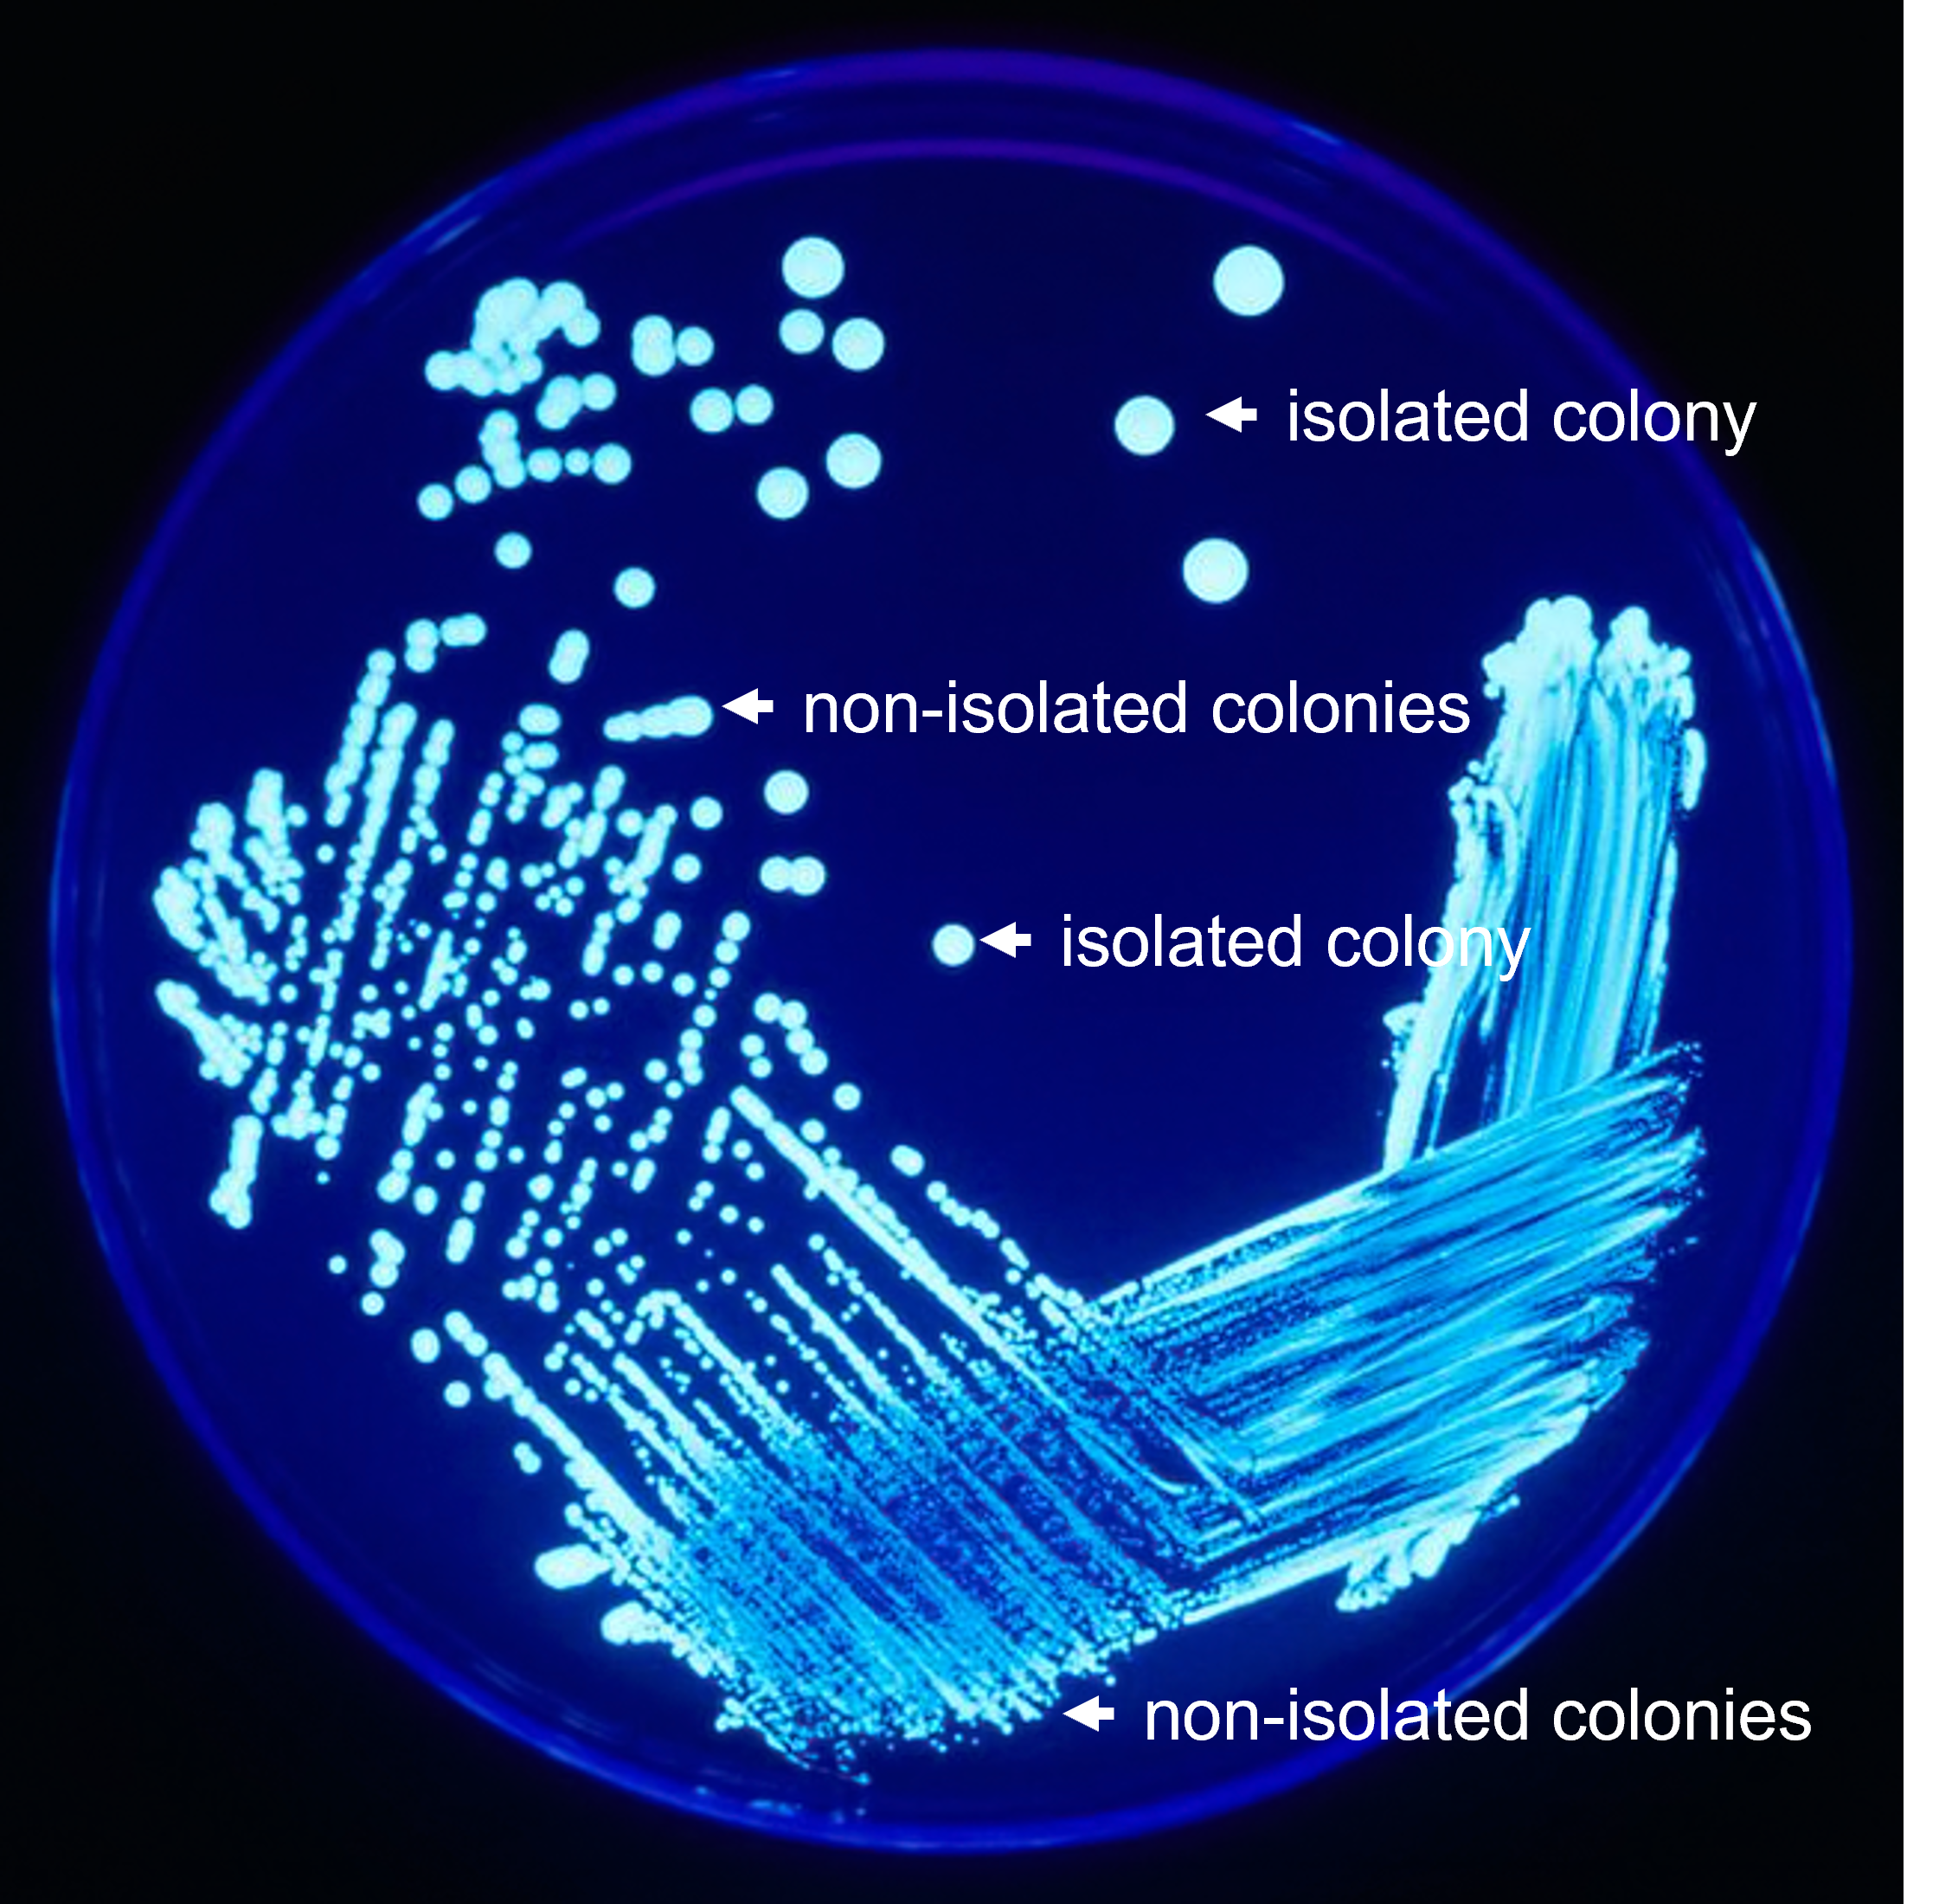 petri plate differentiating isolated colonies versus non-isolated colonies